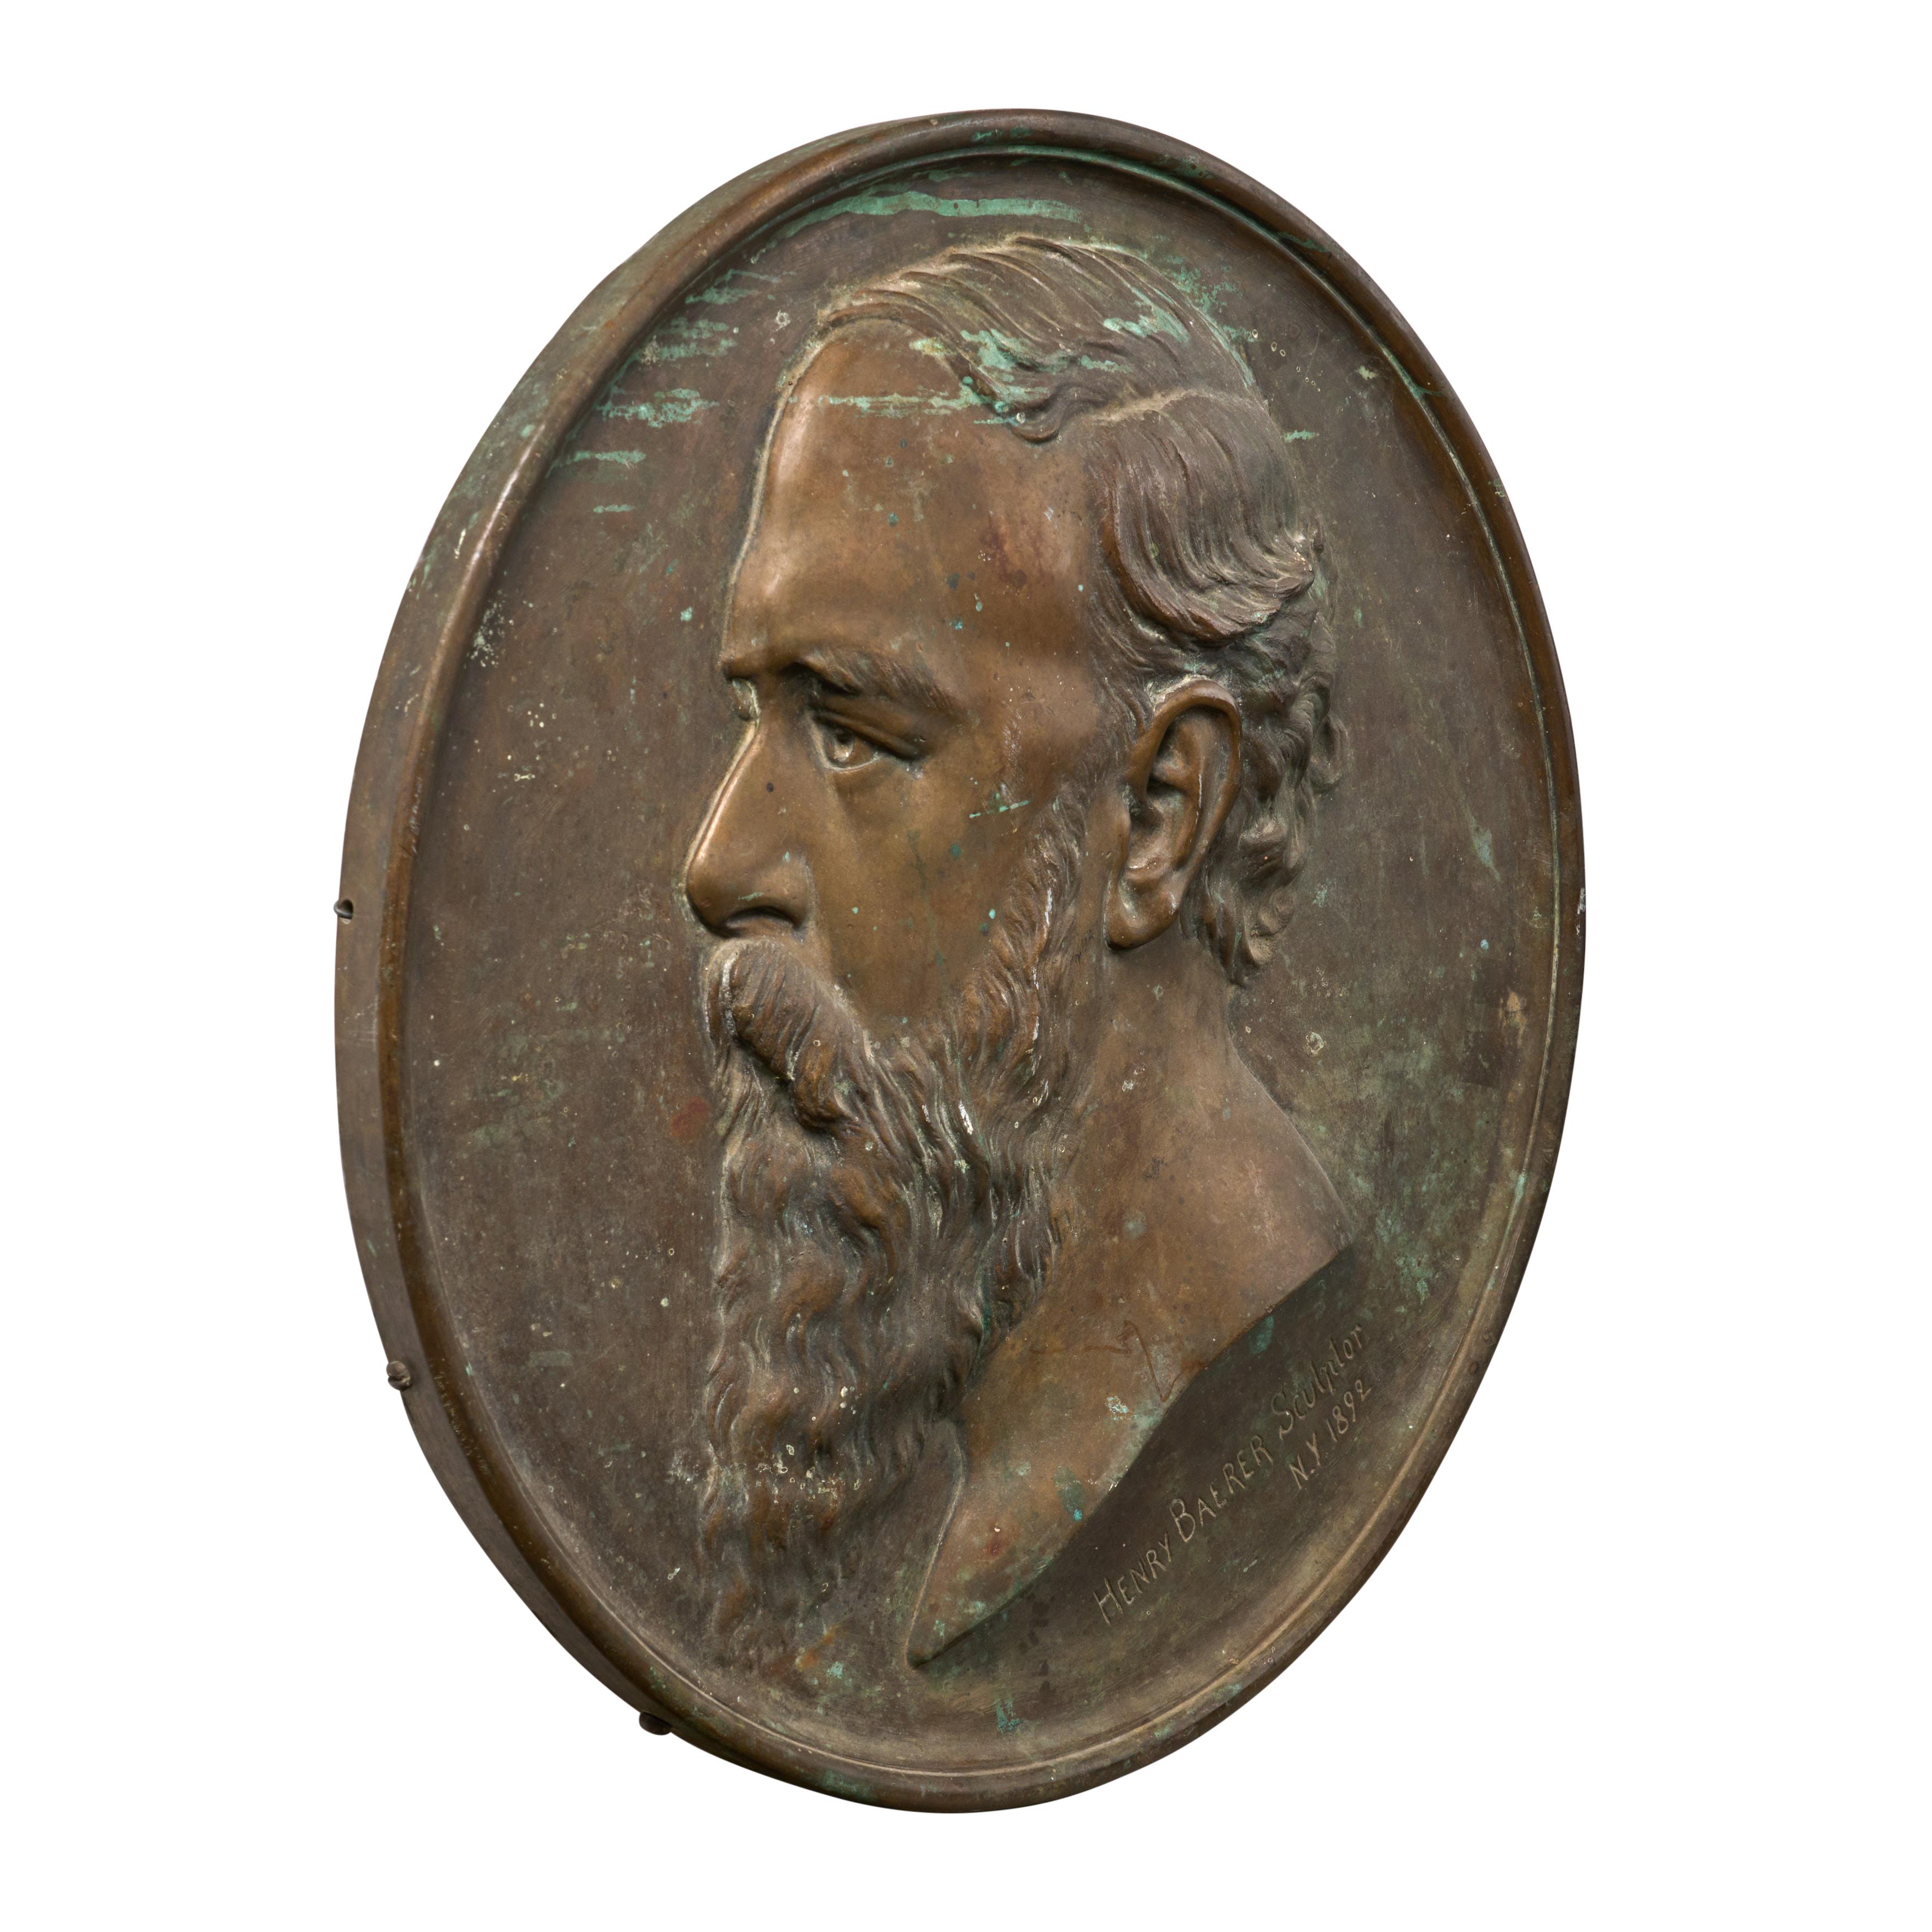 Bronze medallion commemorating Henry Baerer, Sculptor. Famous for the sculpture at The Puck Building, NYC. Great condition with wonderful patina. 